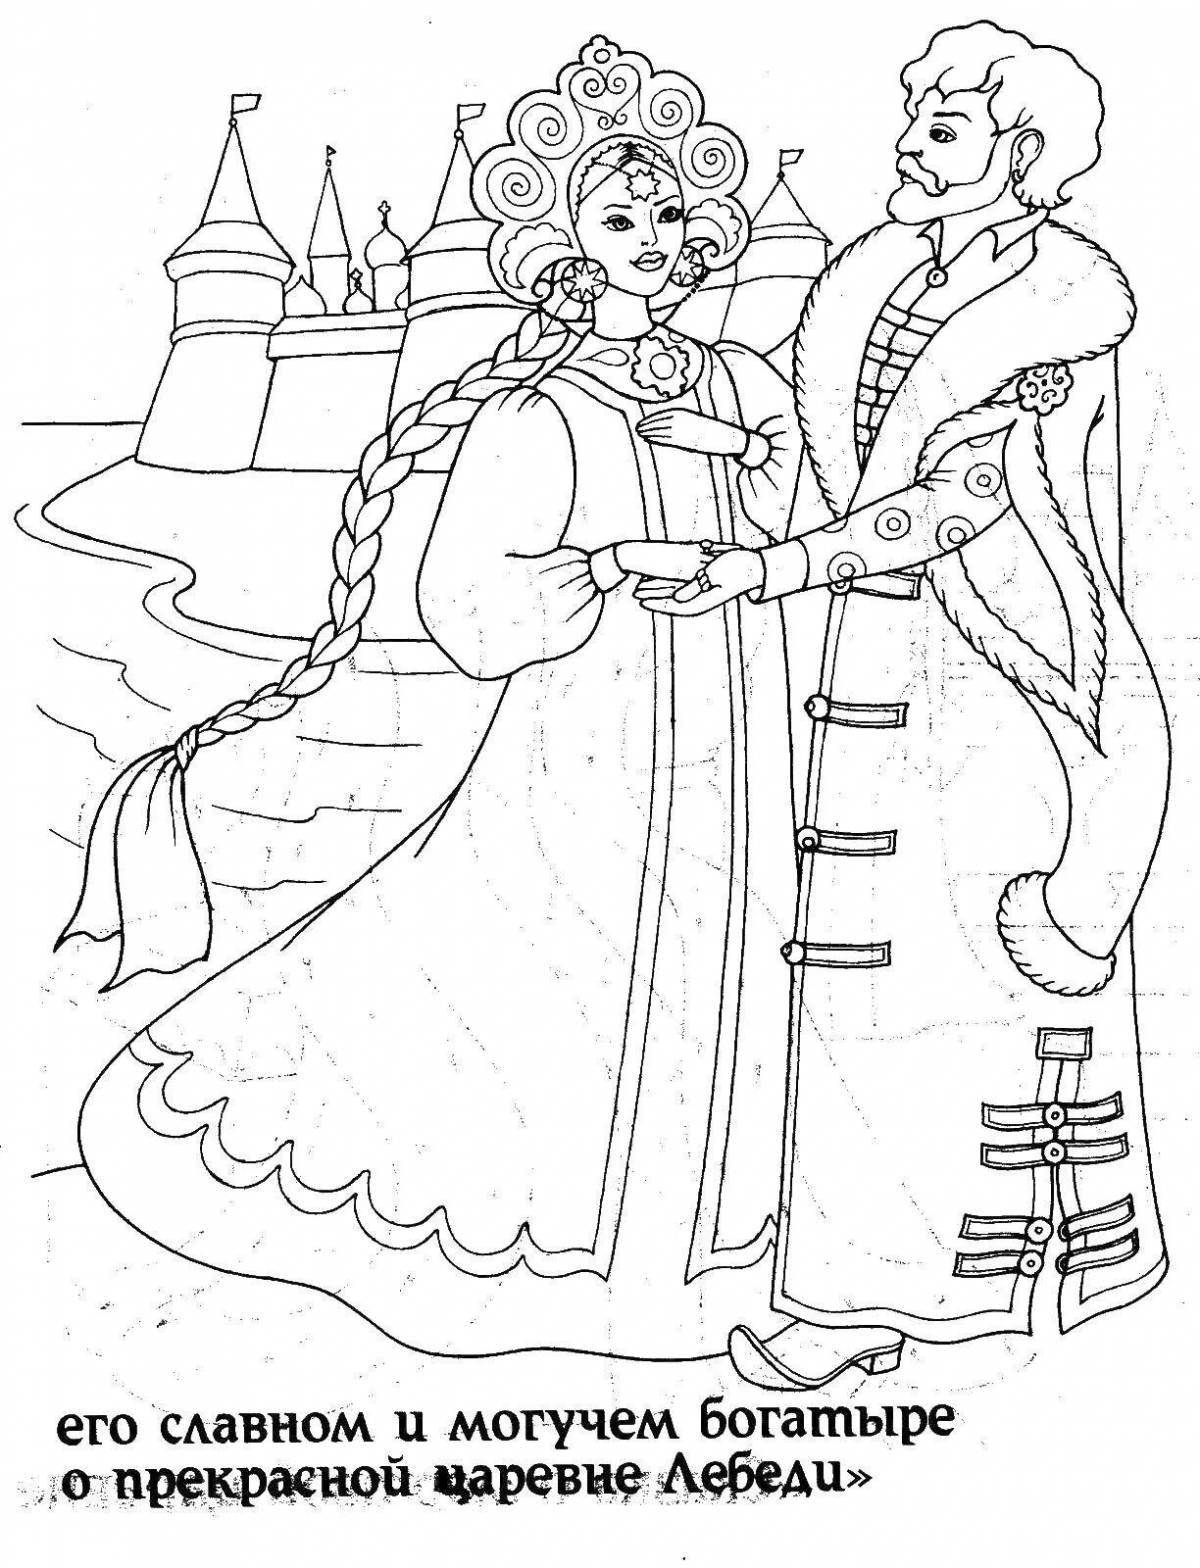 Brilliant coloring book for children 4-5 years old based on Pushkin's fairy tales